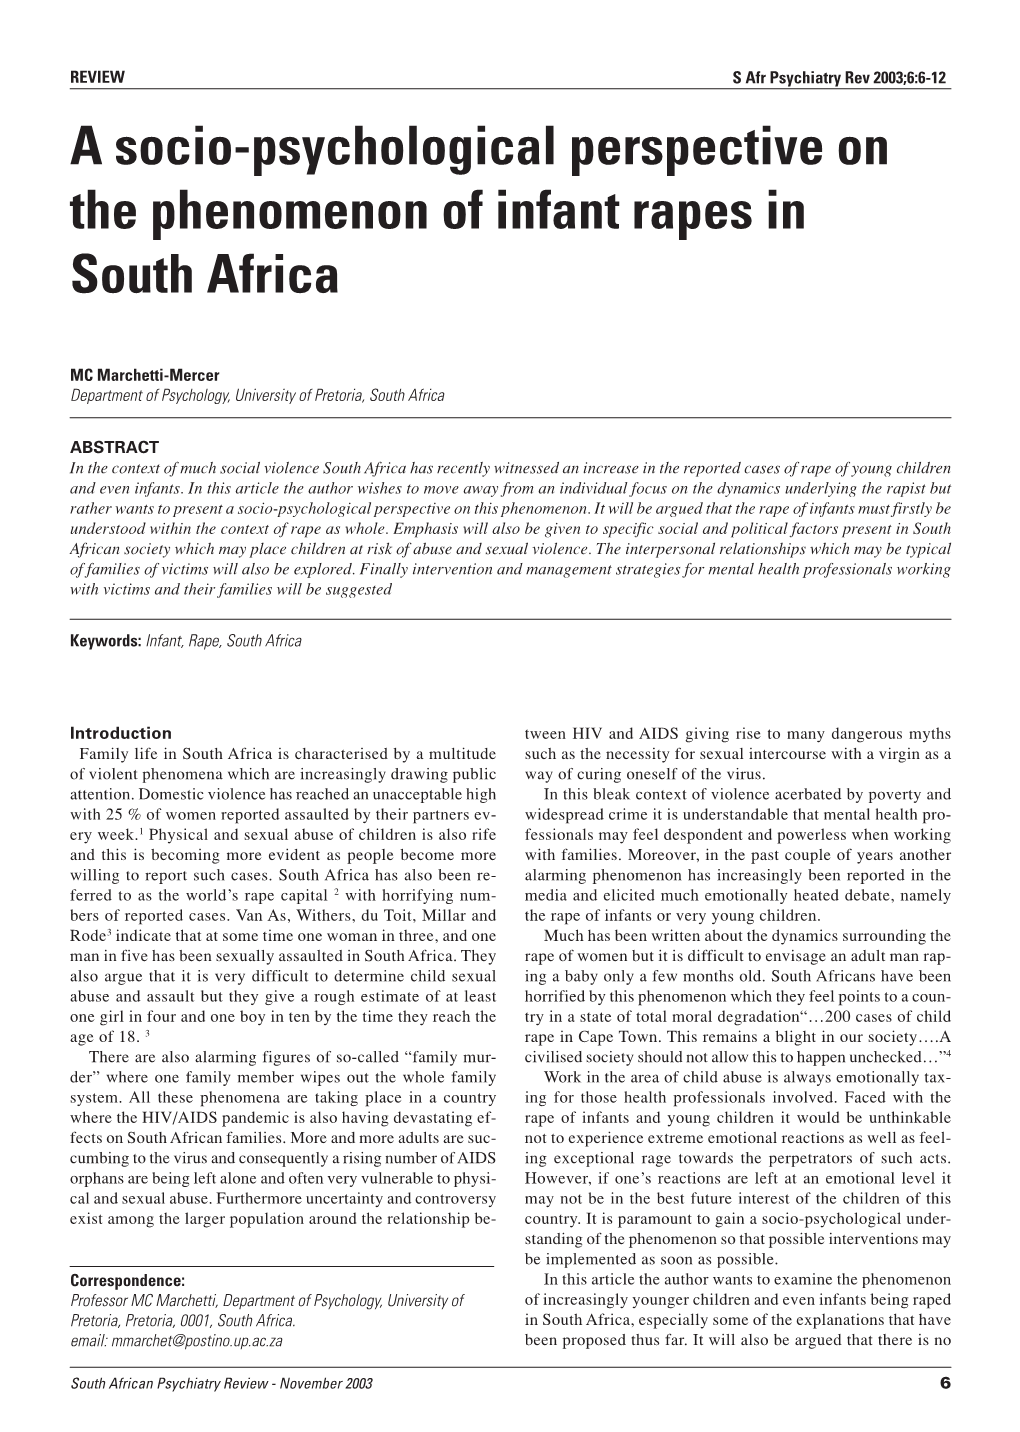 A Socio-Psychological Perspective on the Phenomenon of Infant Rapes in South Africa